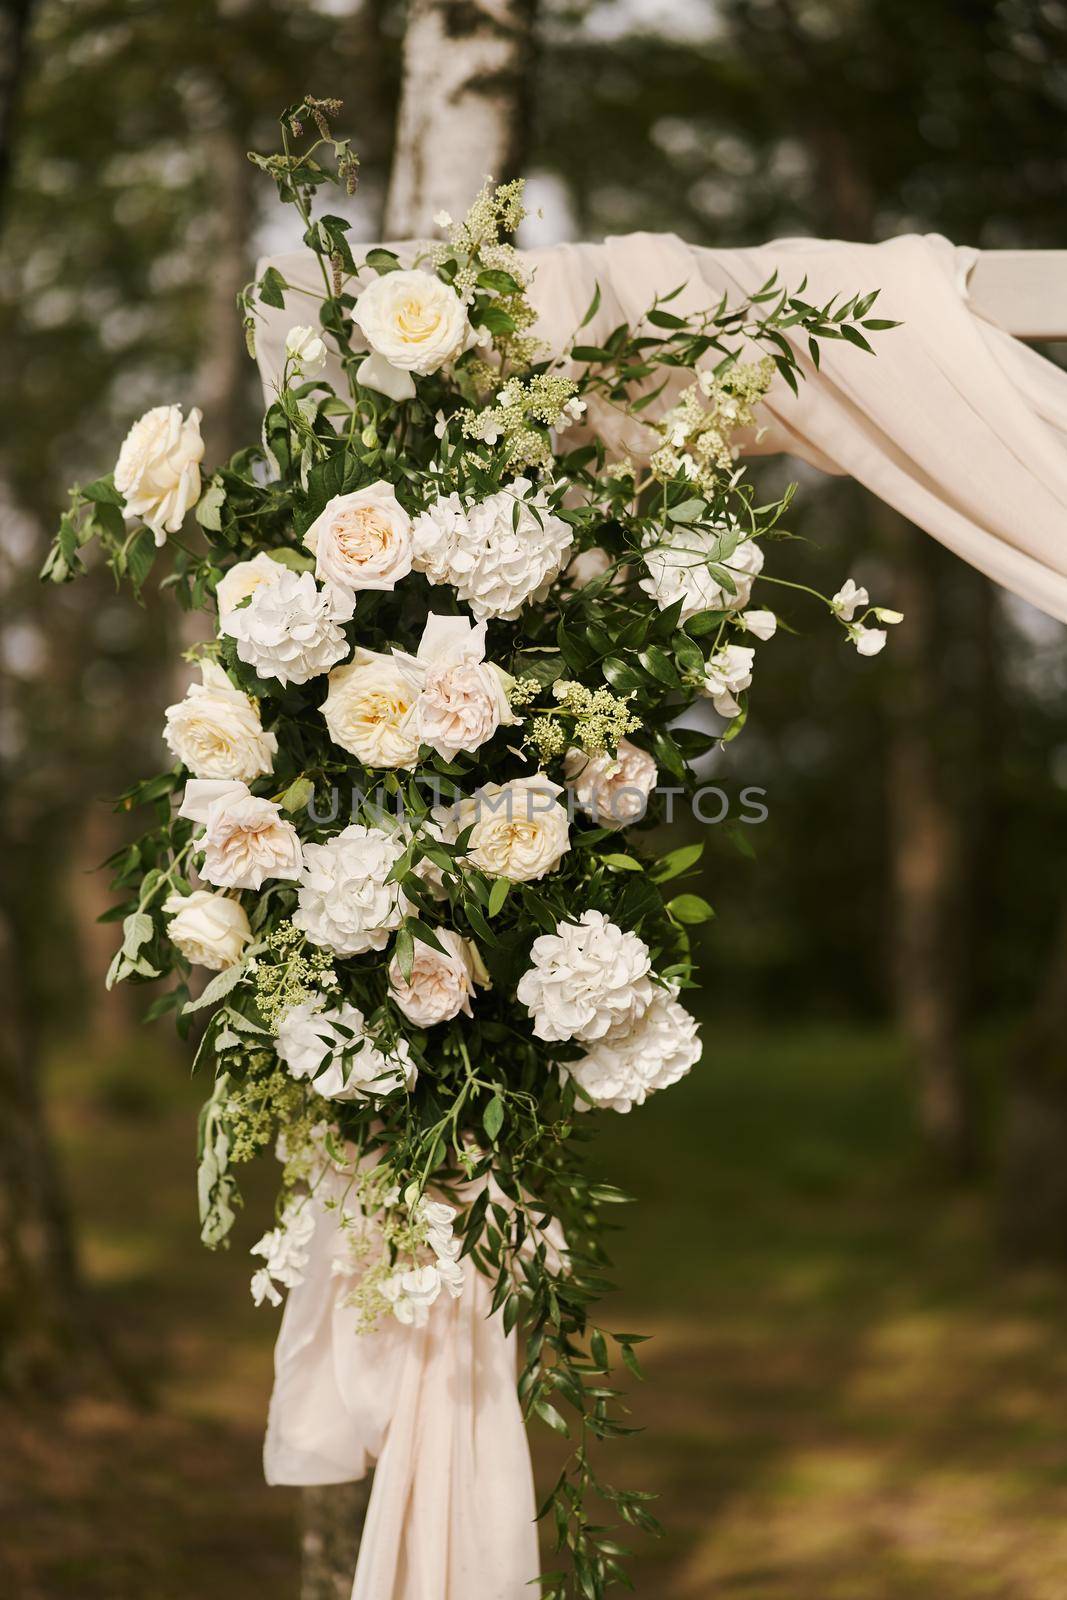 Wedding decorations. Flowers on the wedding arch. Decoration of a wedding celebration. by driver-s